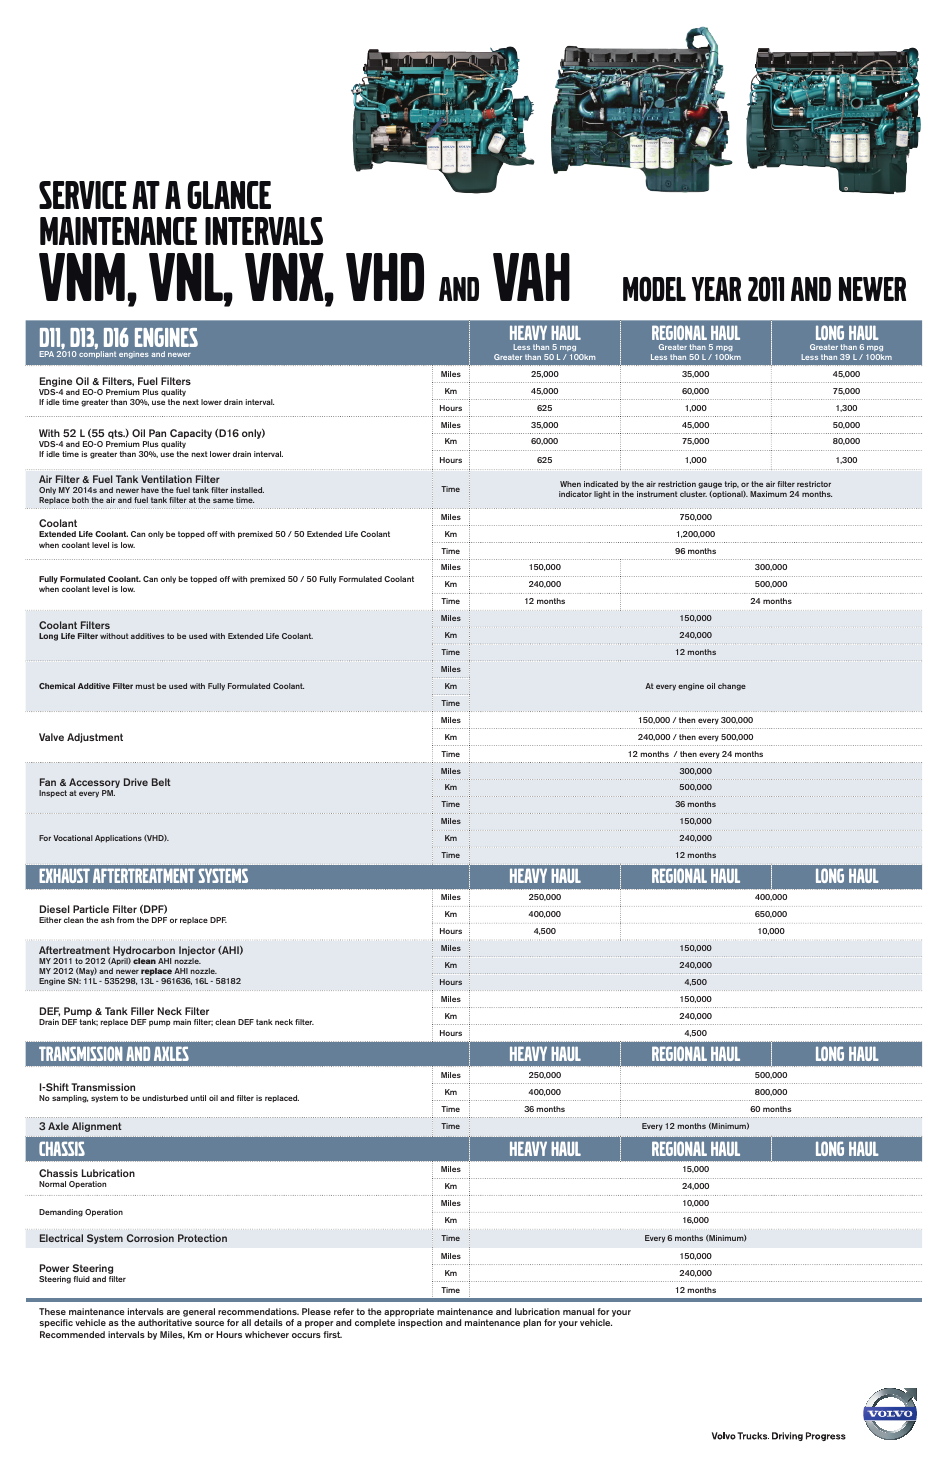 Maintenance Intervals Schedule for 2011 and Newer Volvo VNM, VNL, VNX, VHD and VAH Car Models